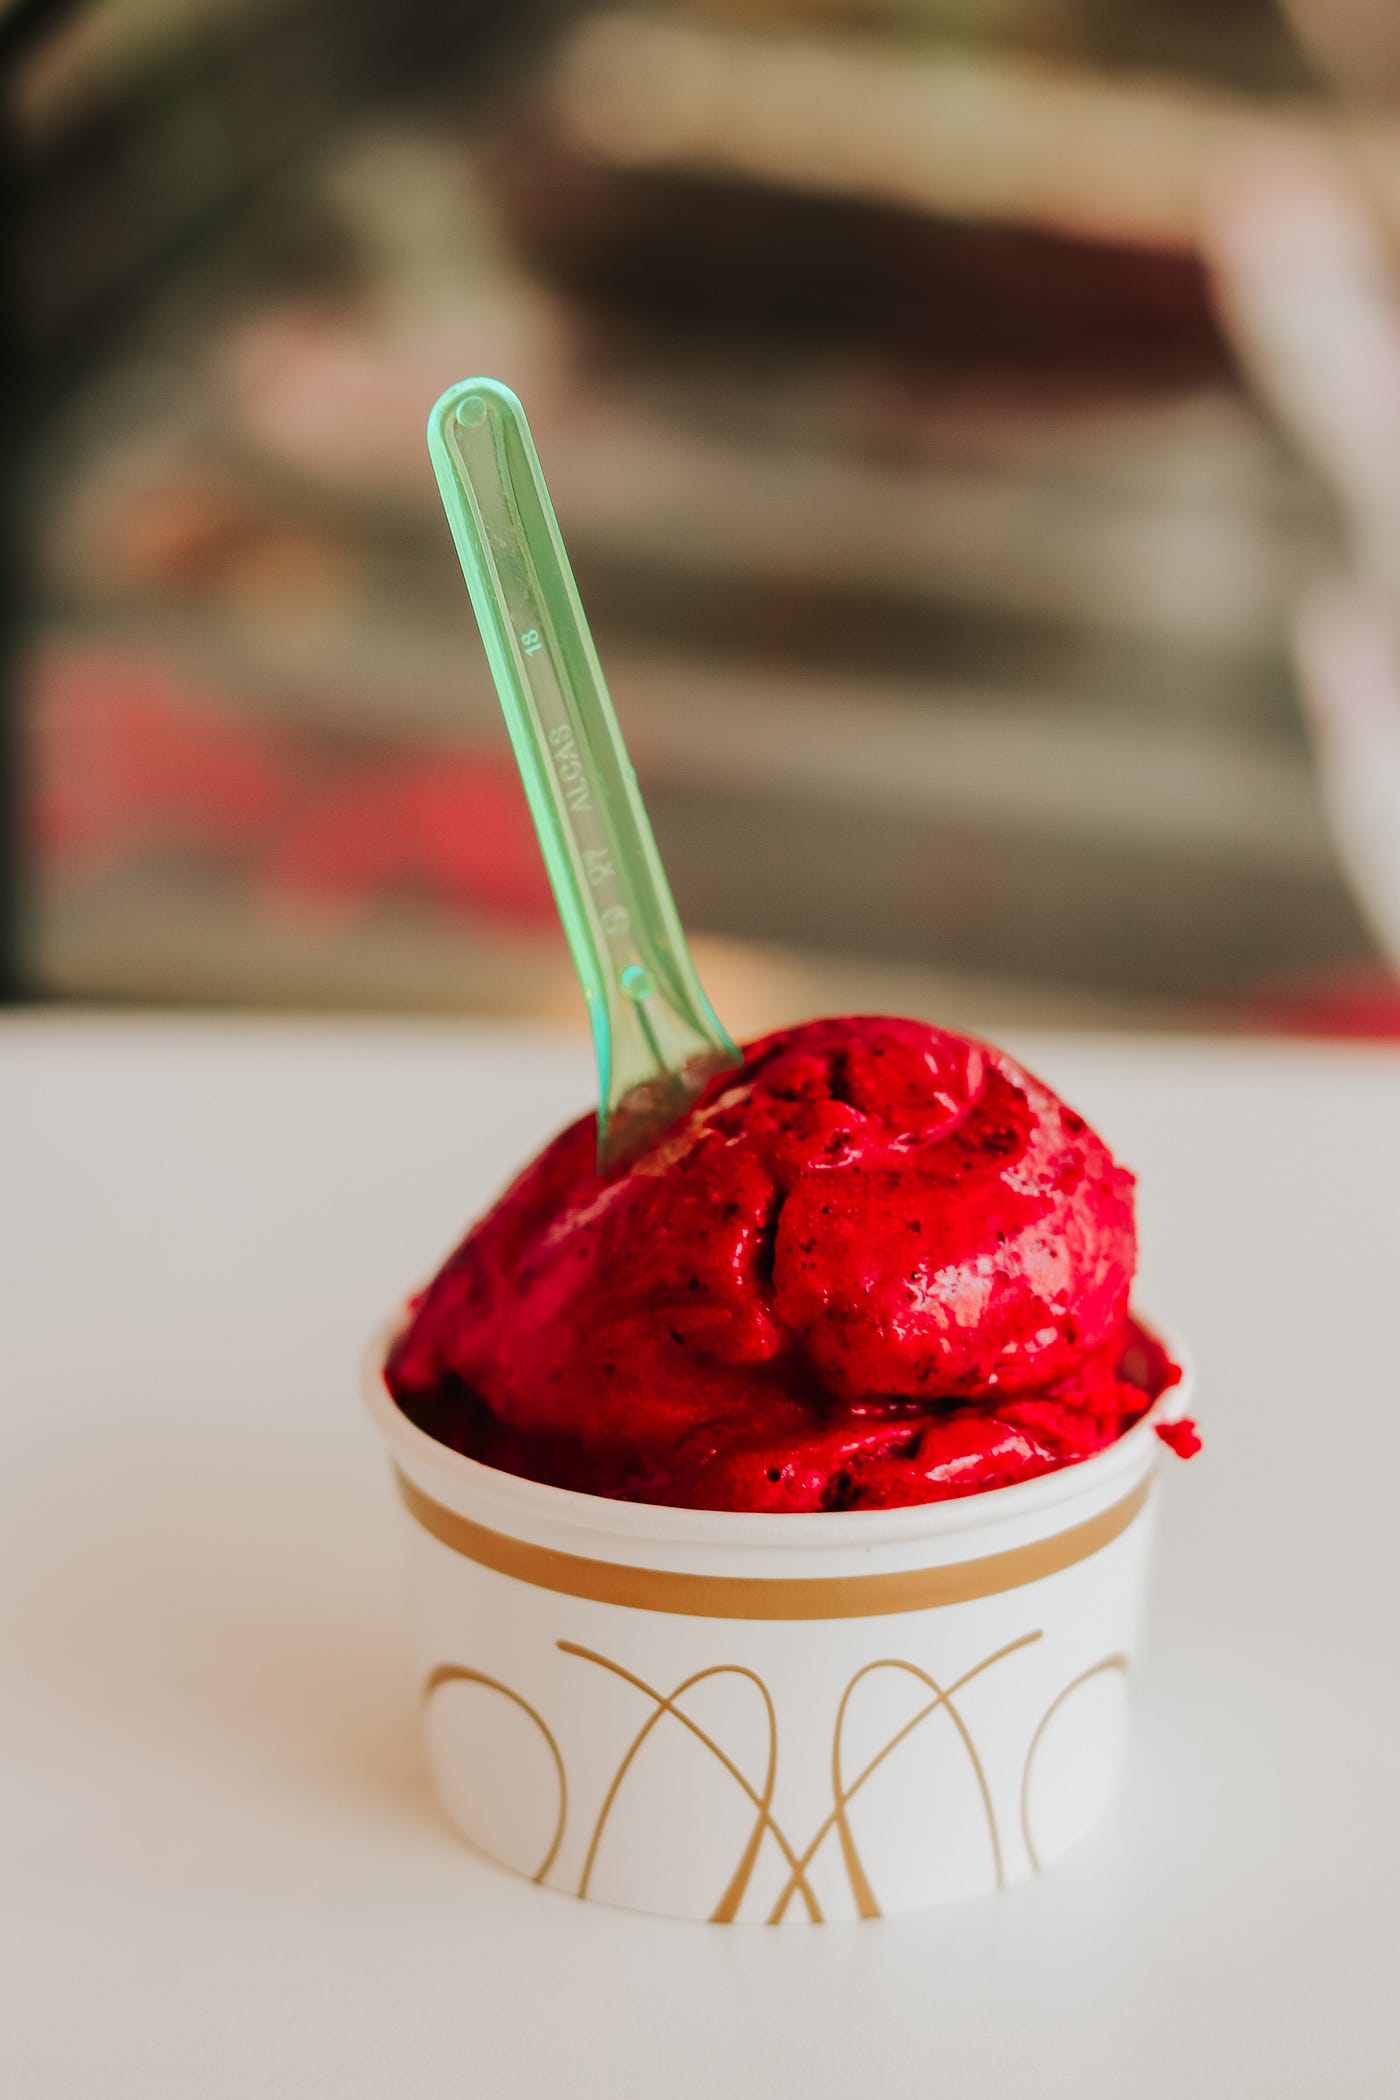 Red sorbet in a cup with a green spoon.